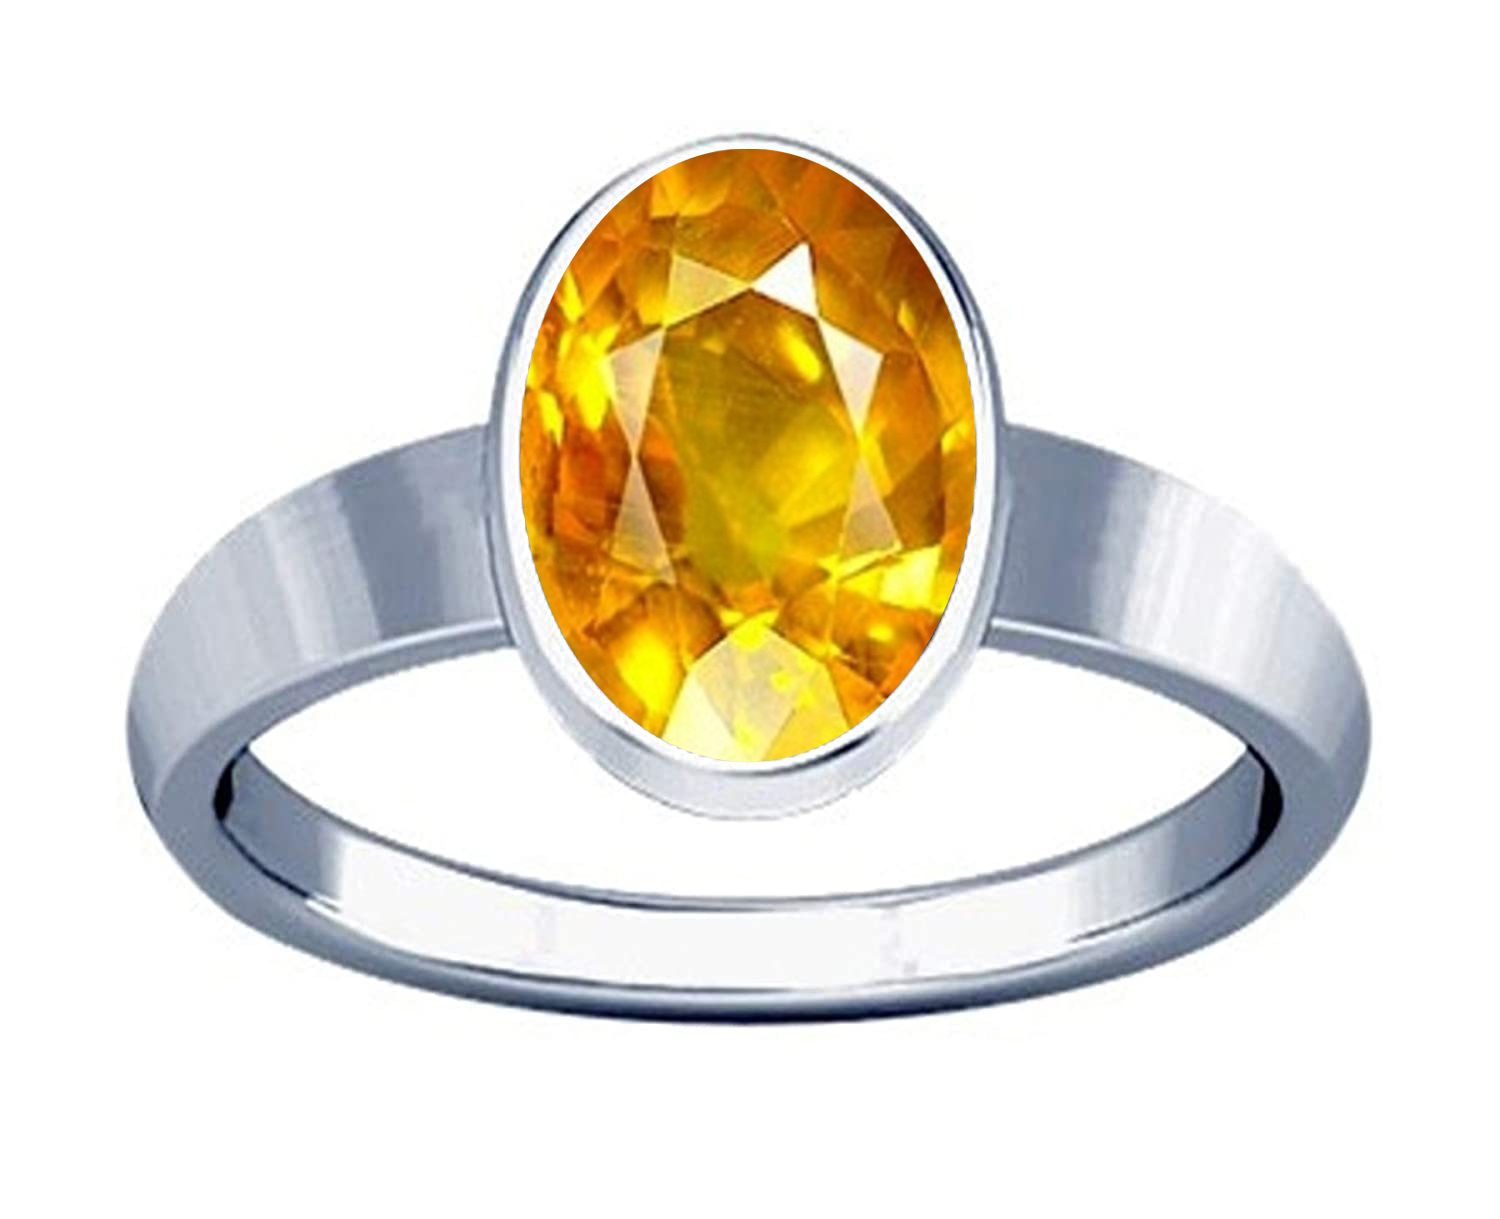 7.25 Ratti Yellow Sapphire/Pukhraj Ring,925 Sterling Silver, Handmade Ring  Certified Yellow Sapphire Ring | Rings for men, Gold ring designs, Handmade  ring